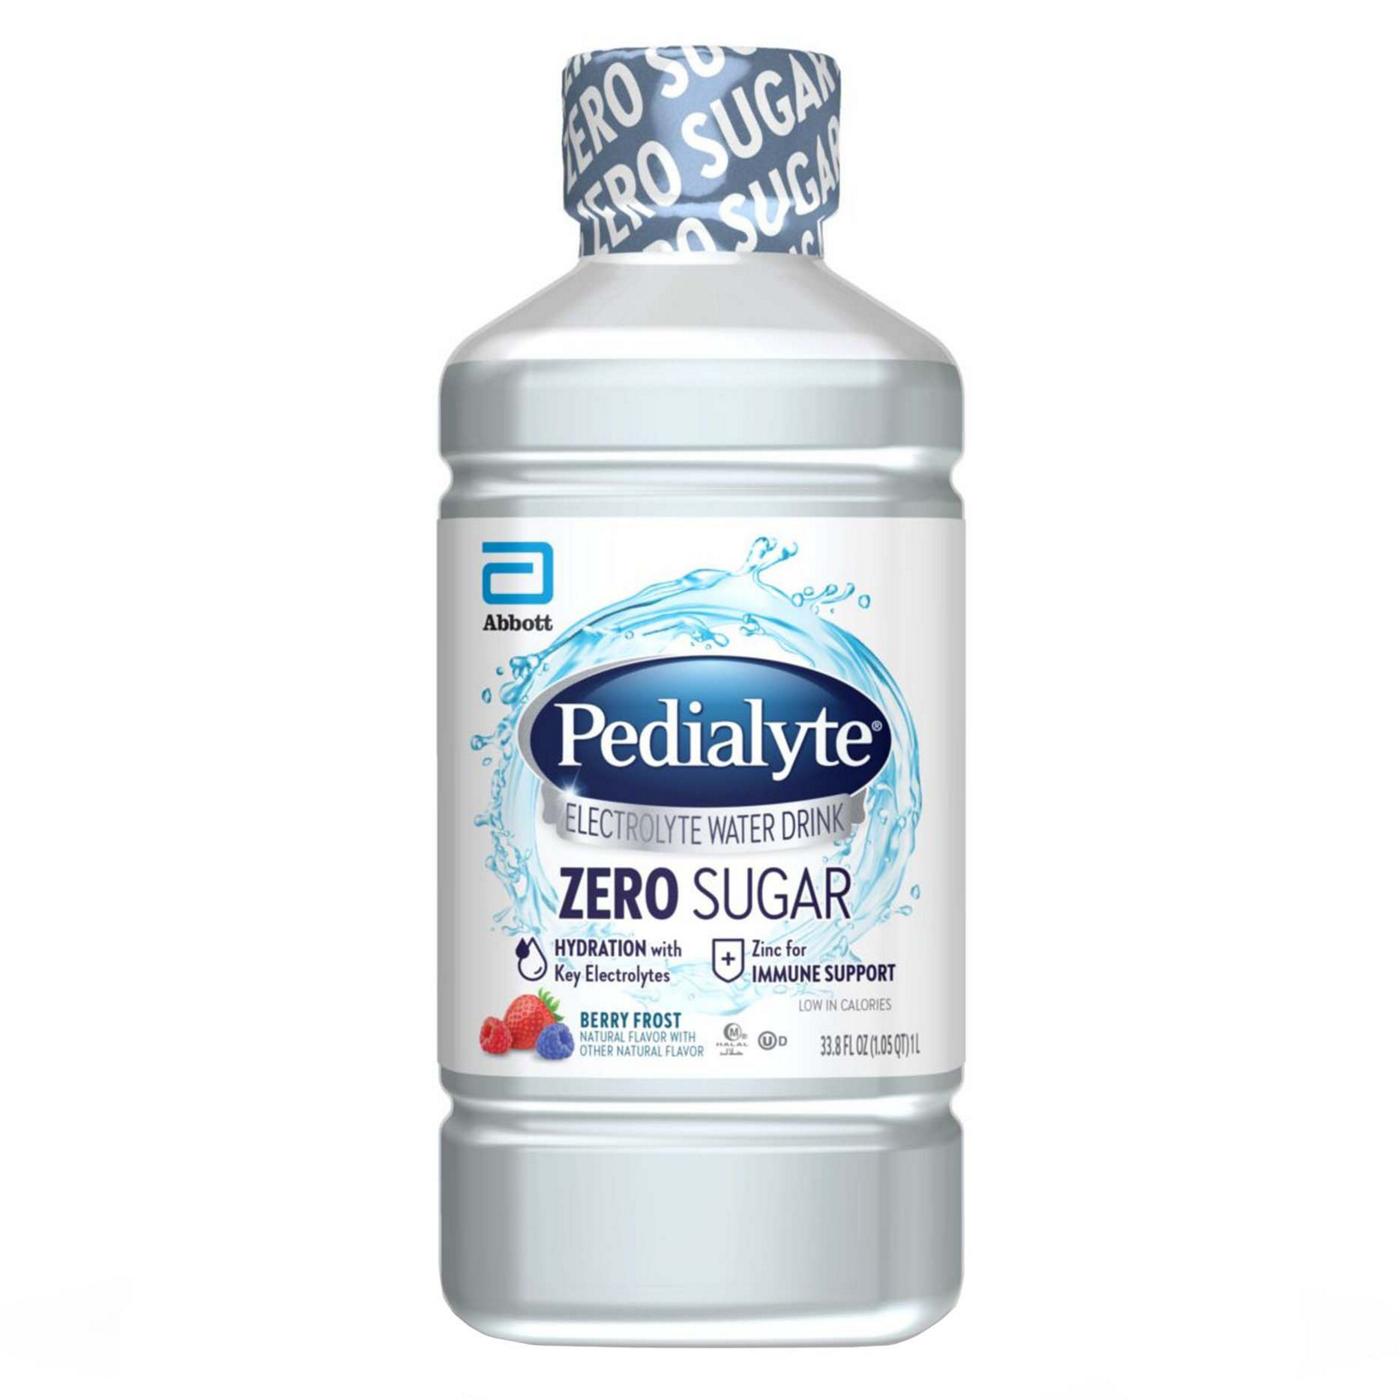 Pedialyte Zero Sugar Electrolyte Water Drink - Berry Frost; image 1 of 9